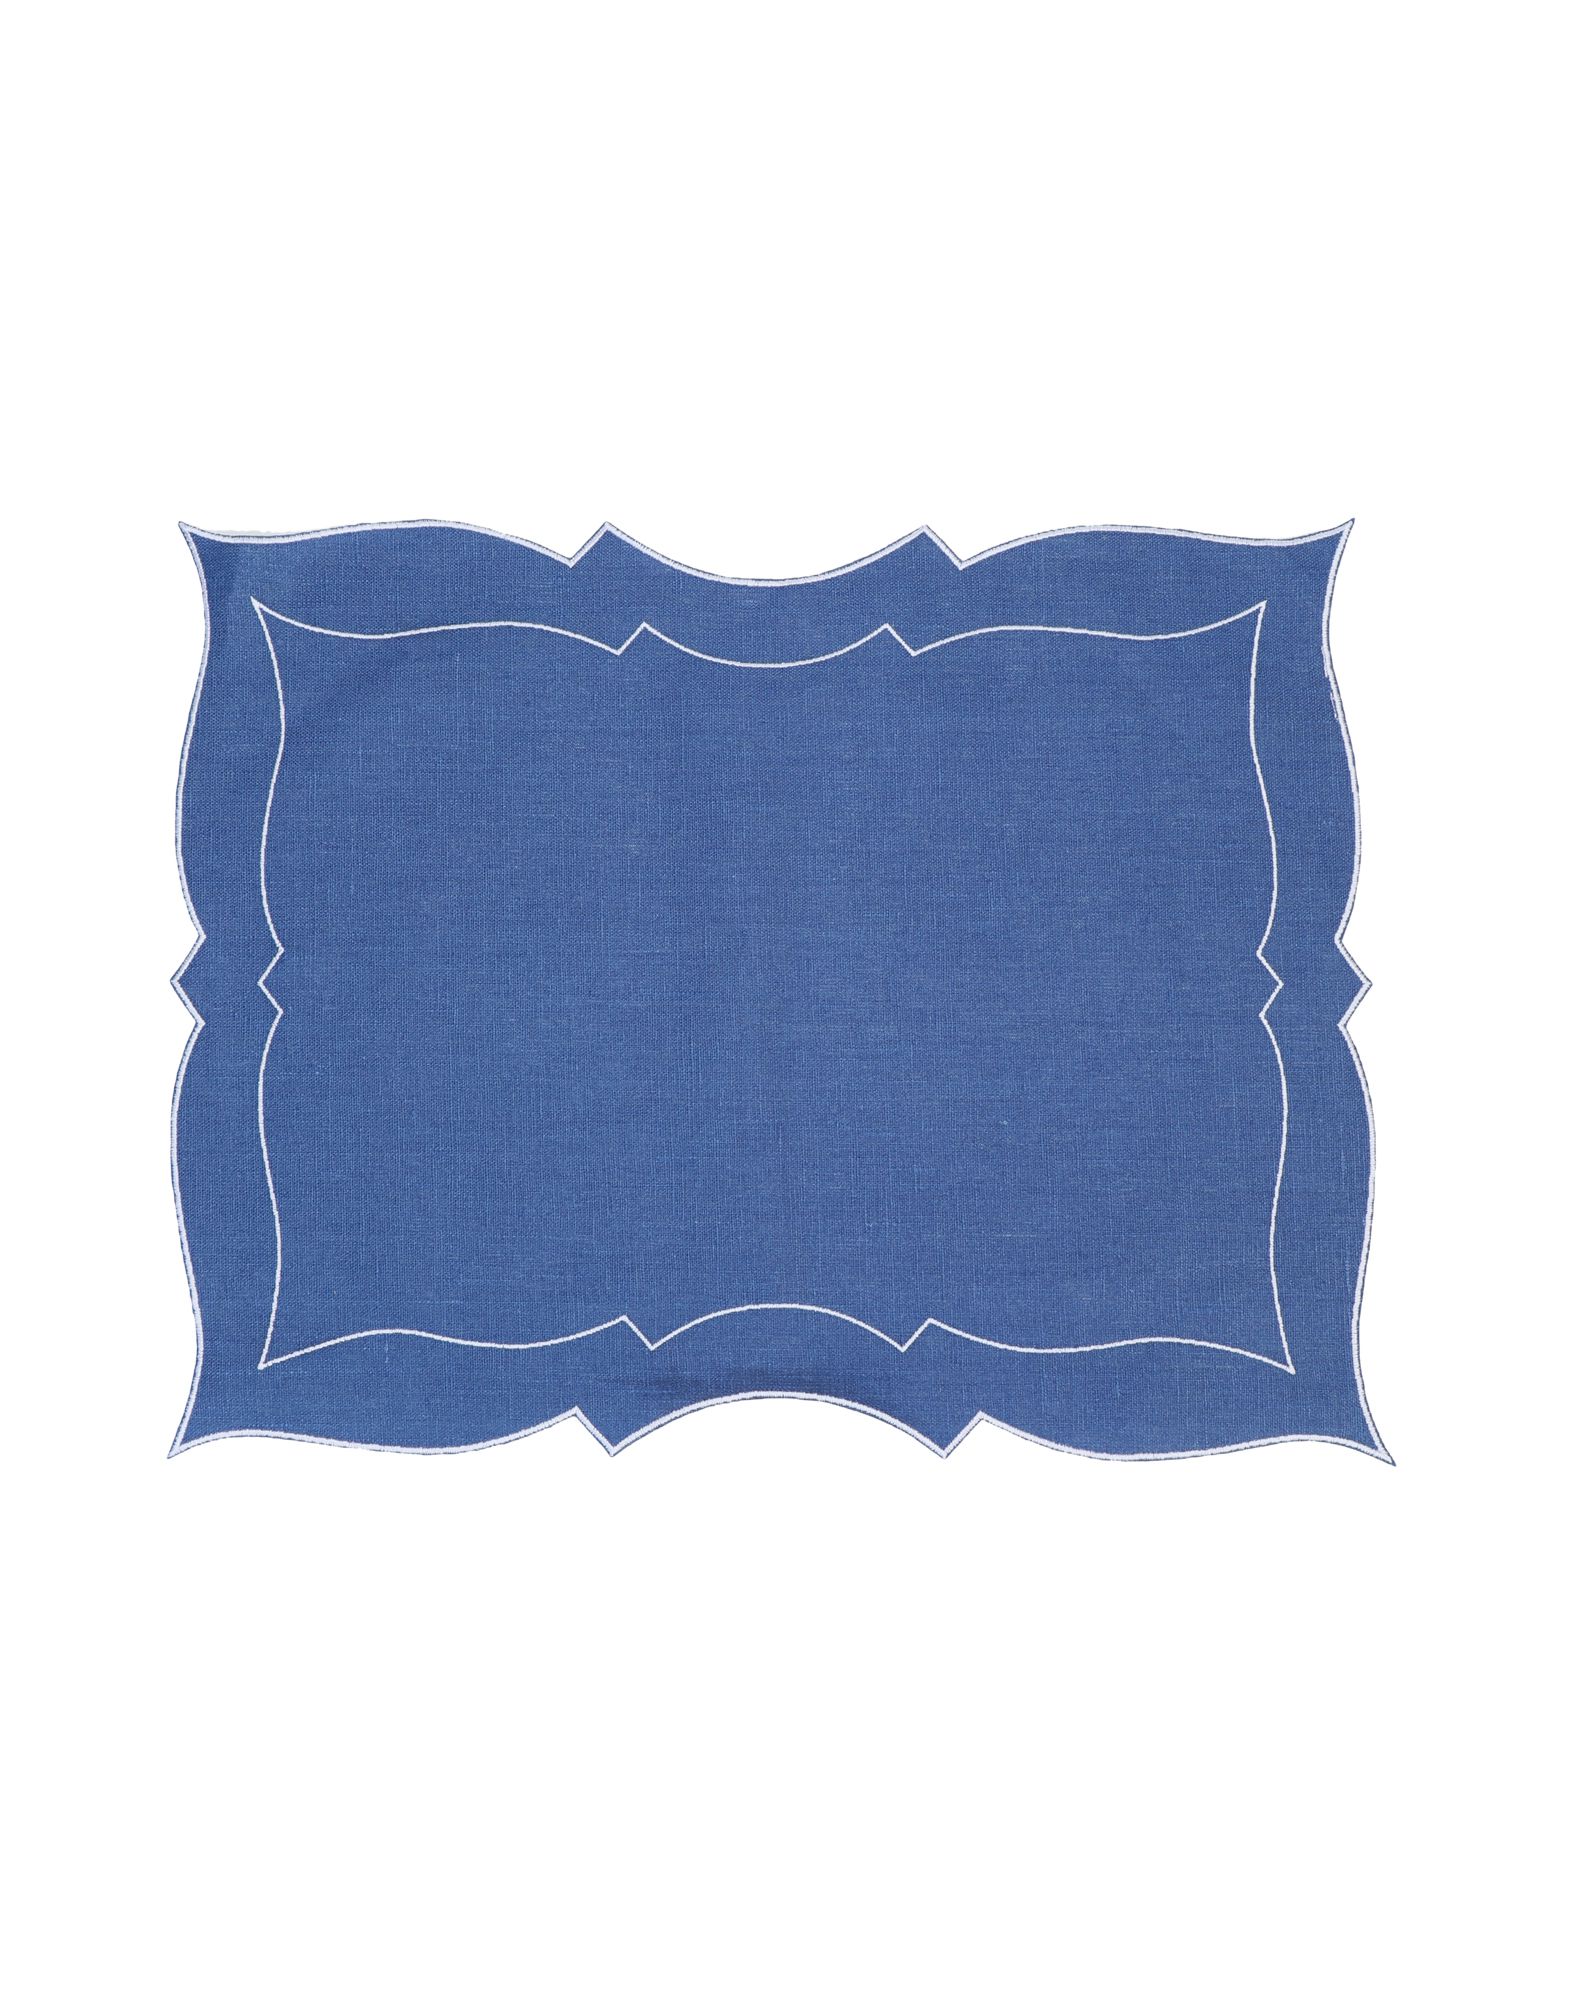 La Gallina Matta Placemat And Runners In Blue